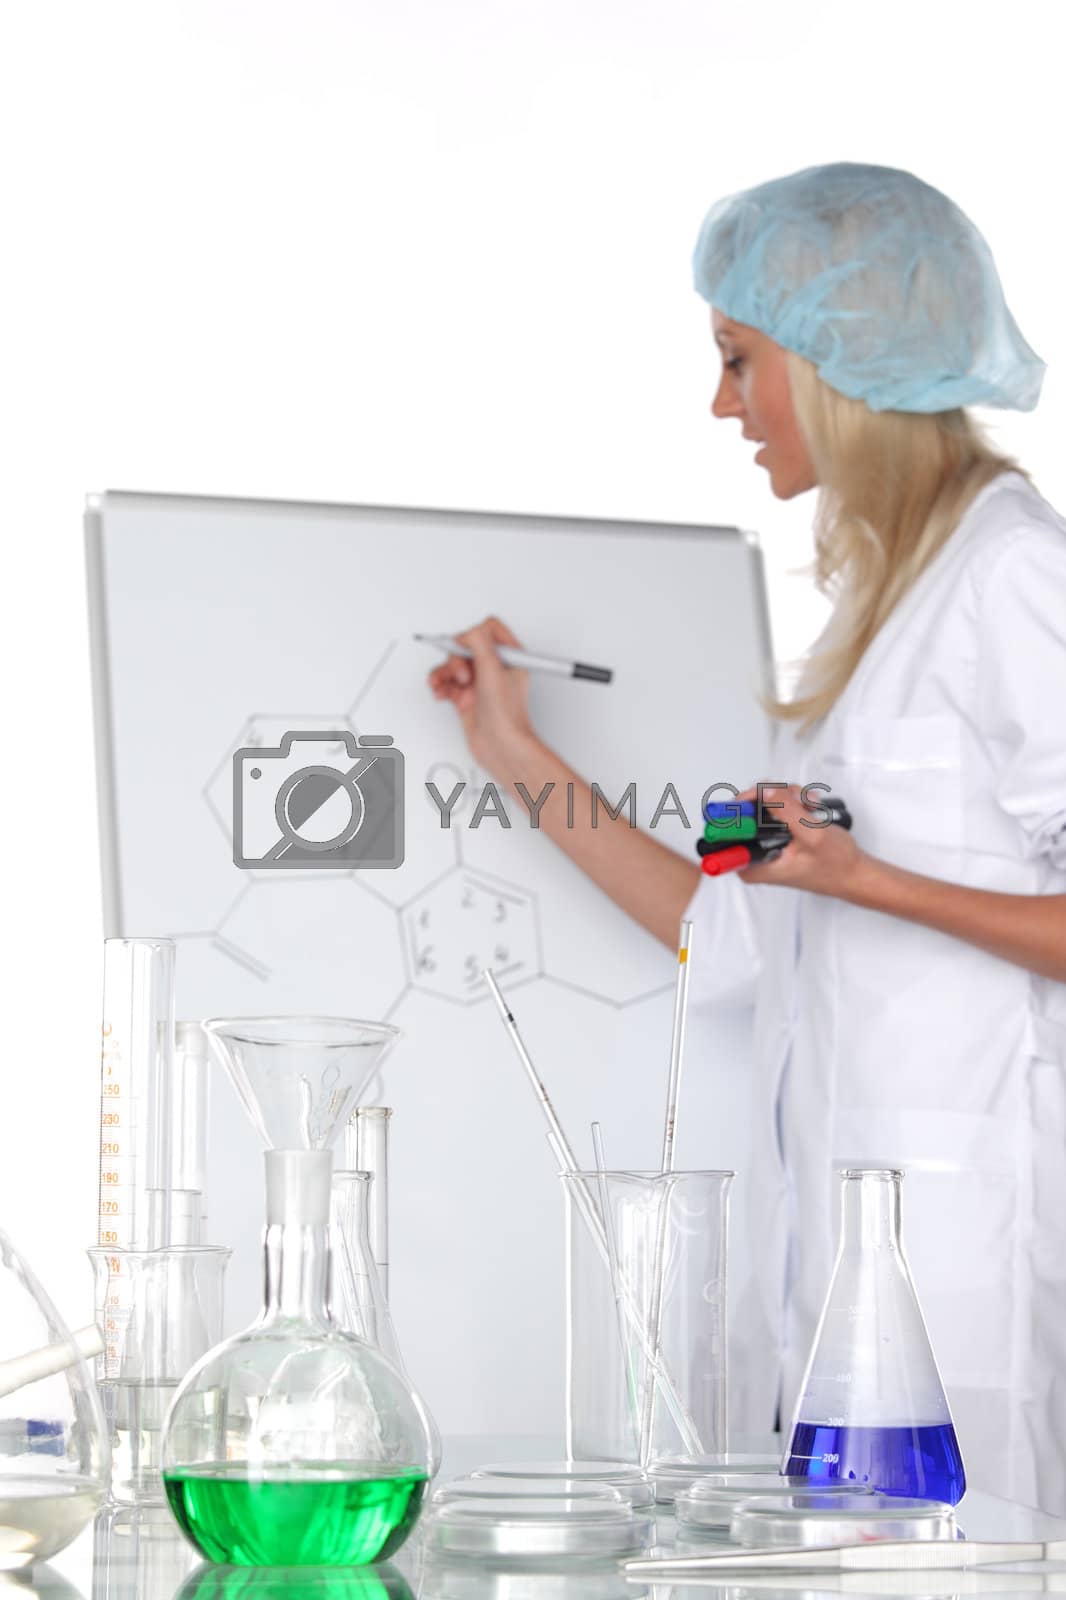 Royalty free image of chemical experiment by Yellowj